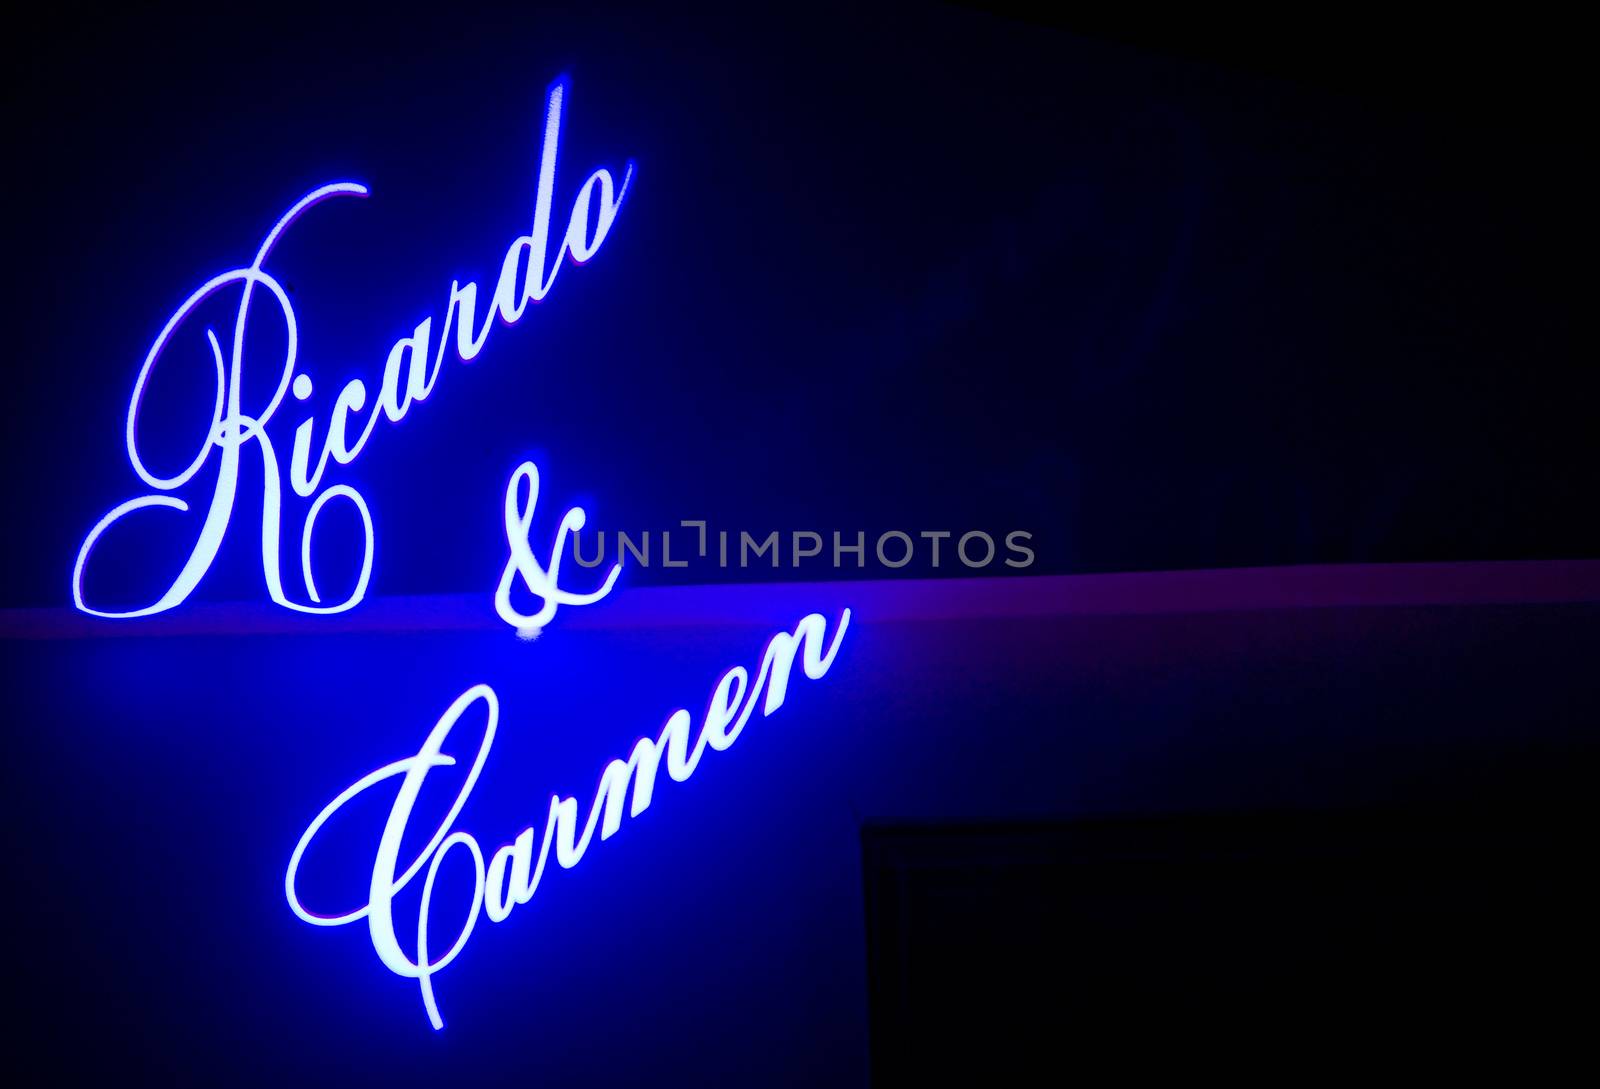 Names of the Spanish wedding bride and groom projected on wall of marriage reception building at night "Carmen & Ricardo". 